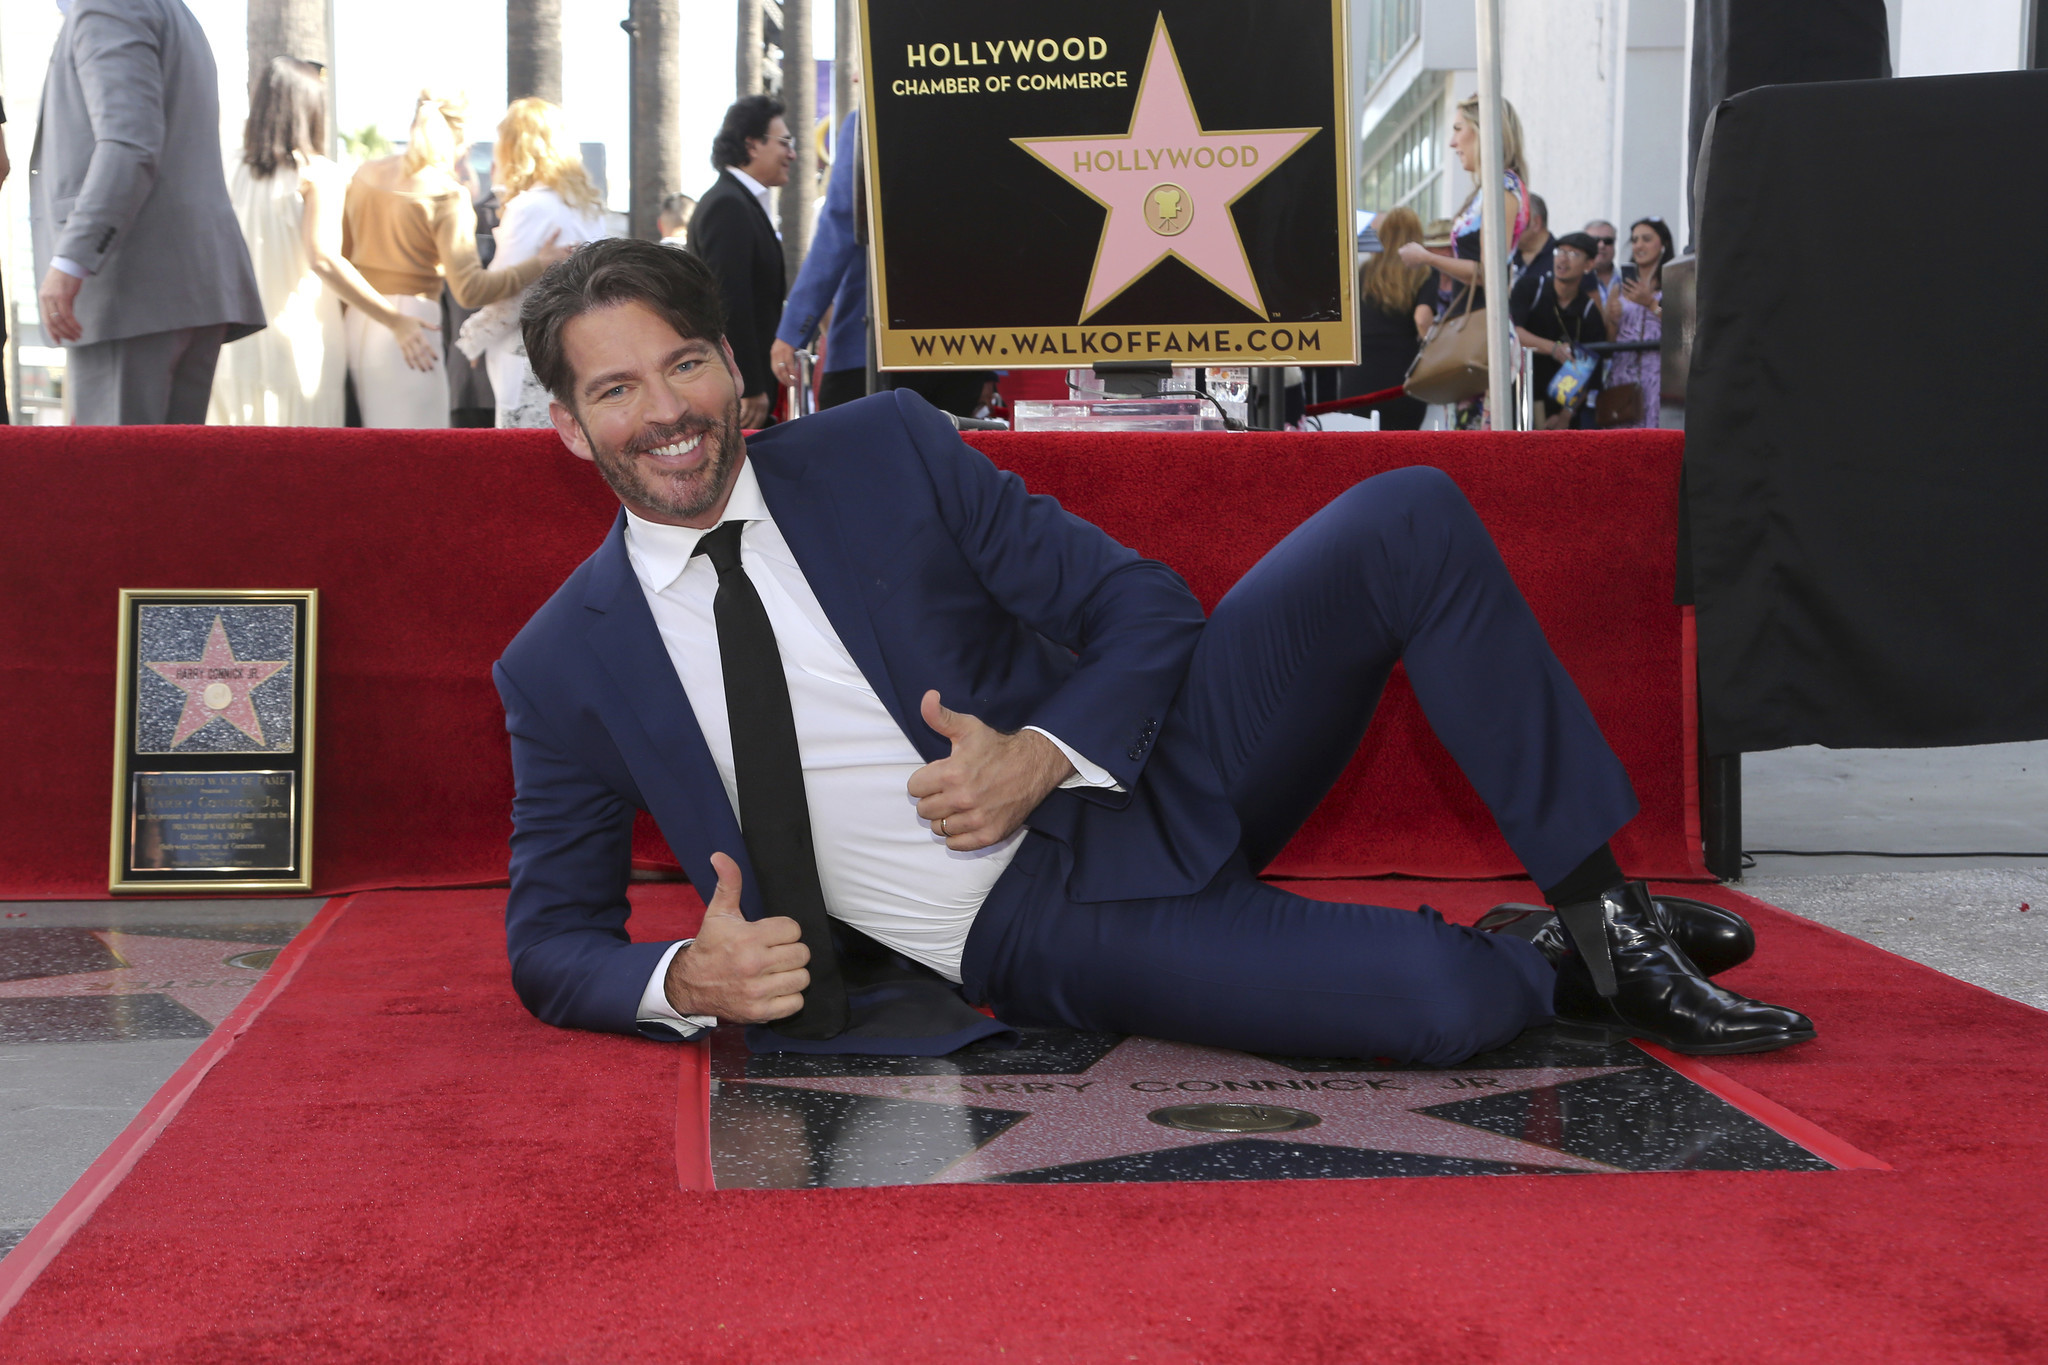 Harry Connick Jr. poses atop his star during a ceremony honoring him with a star on the Hollywood Walk of Fame on Oct. 24, 2019 in Los Angeles, Calif.